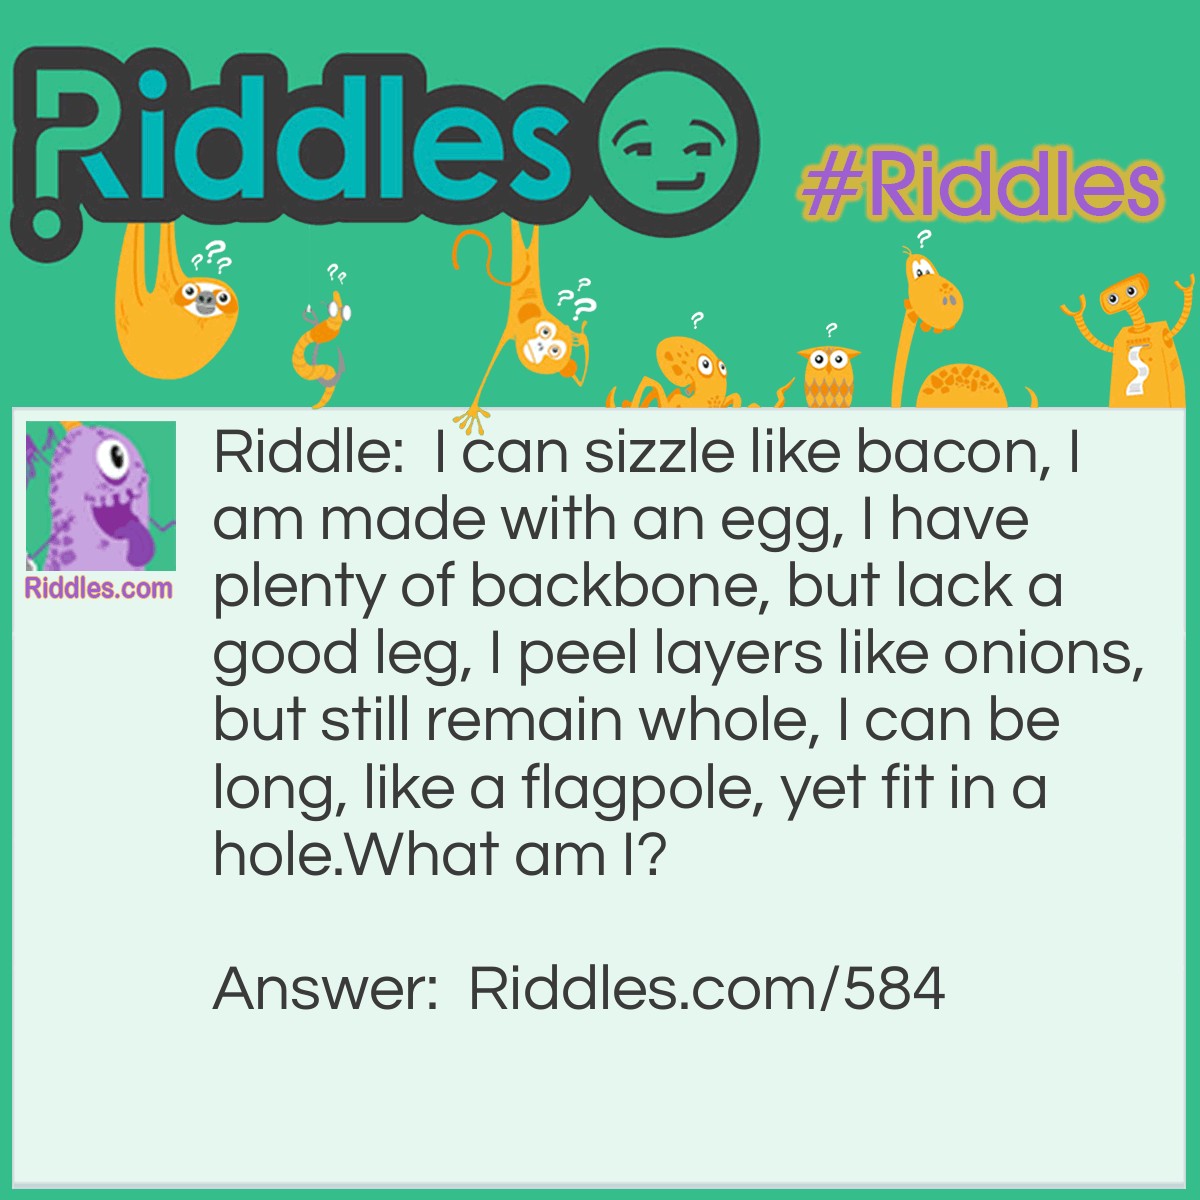 Riddle: I can sizzle like bacon, I am made with an egg, I have plenty of backbone, but lack a good leg, I peel layers like onions, but still remain whole, I can be long, like a flagpole, yet fit in a hole.
What am I? Answer: I'm a snake.